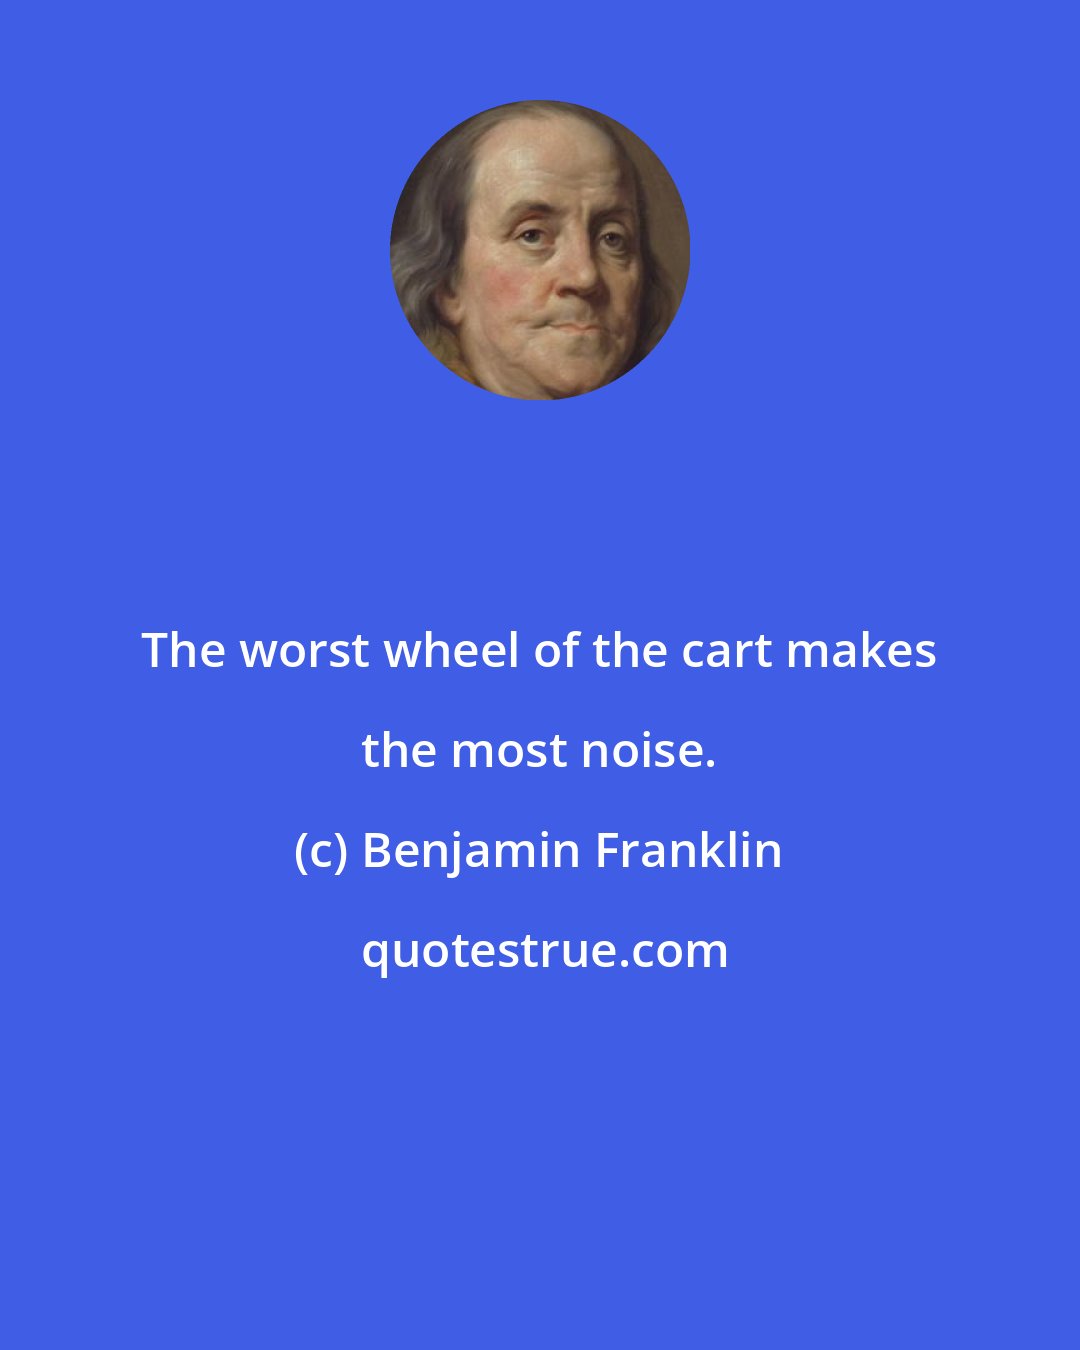 Benjamin Franklin: The worst wheel of the cart makes the most noise.